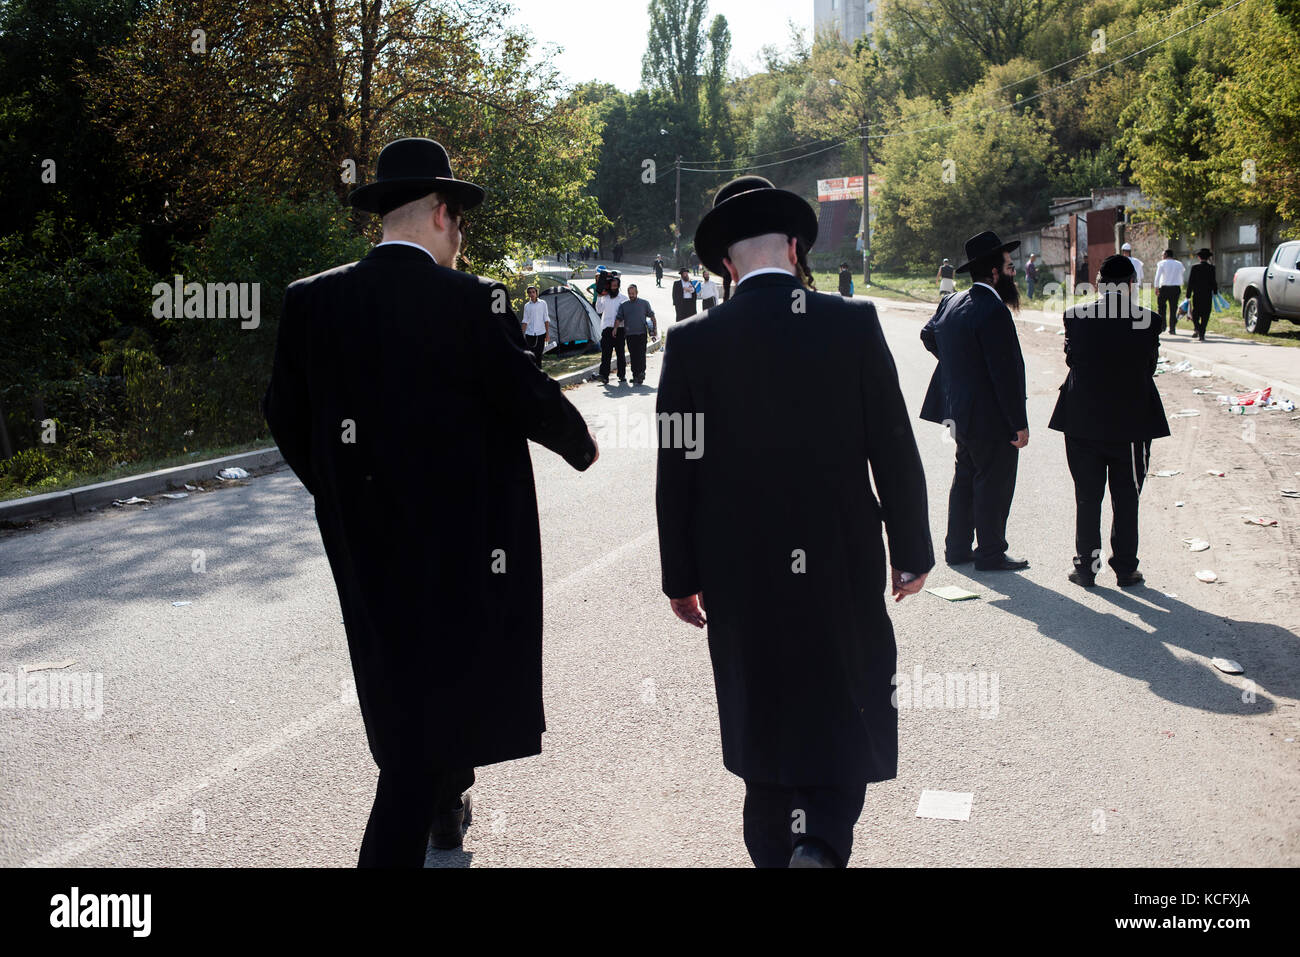 Jewish New Year in Uman, Ukraine. Every year, thousands of Orthodox Bratslav Hasidic Jews from different countries gather in Uman to mark Rosh Hashanah, the Jewish New Year, near the tomb of Rabbi Nachman, a great grandson of the founder of Hasidism. Stock Photo